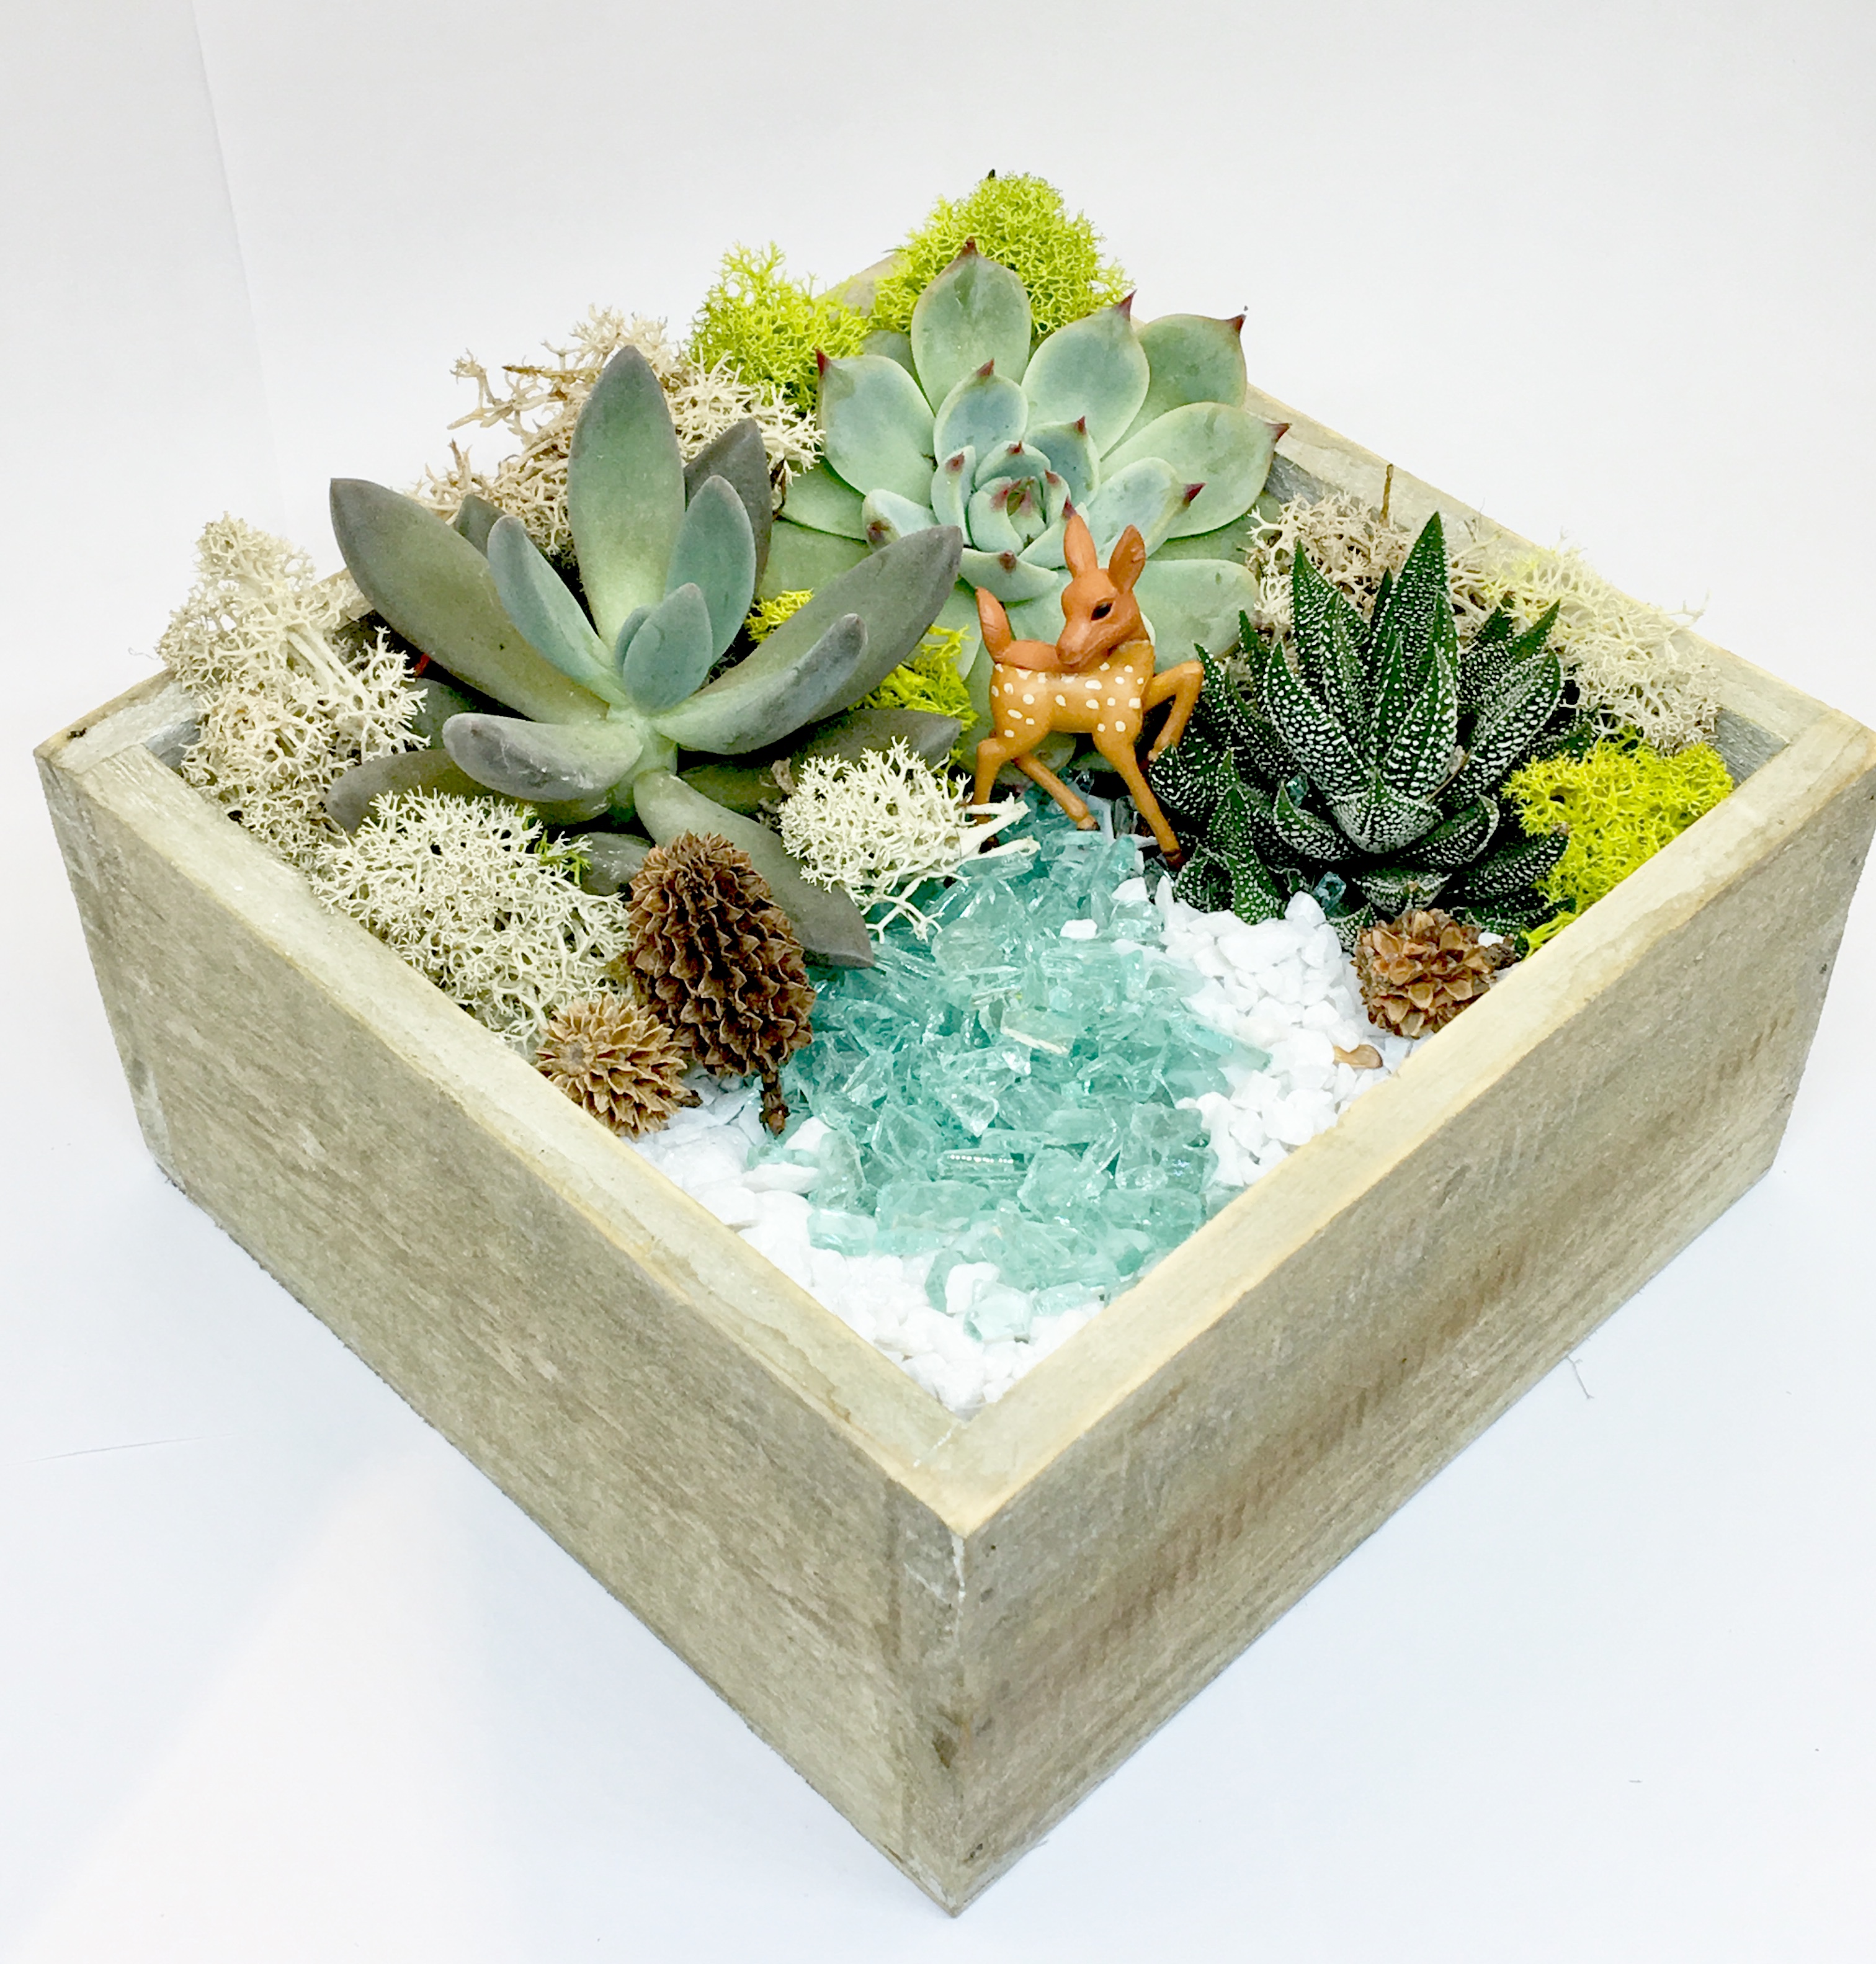 A Sweet Deer  Natural Wood Square Planter plant nite project by Yaymaker